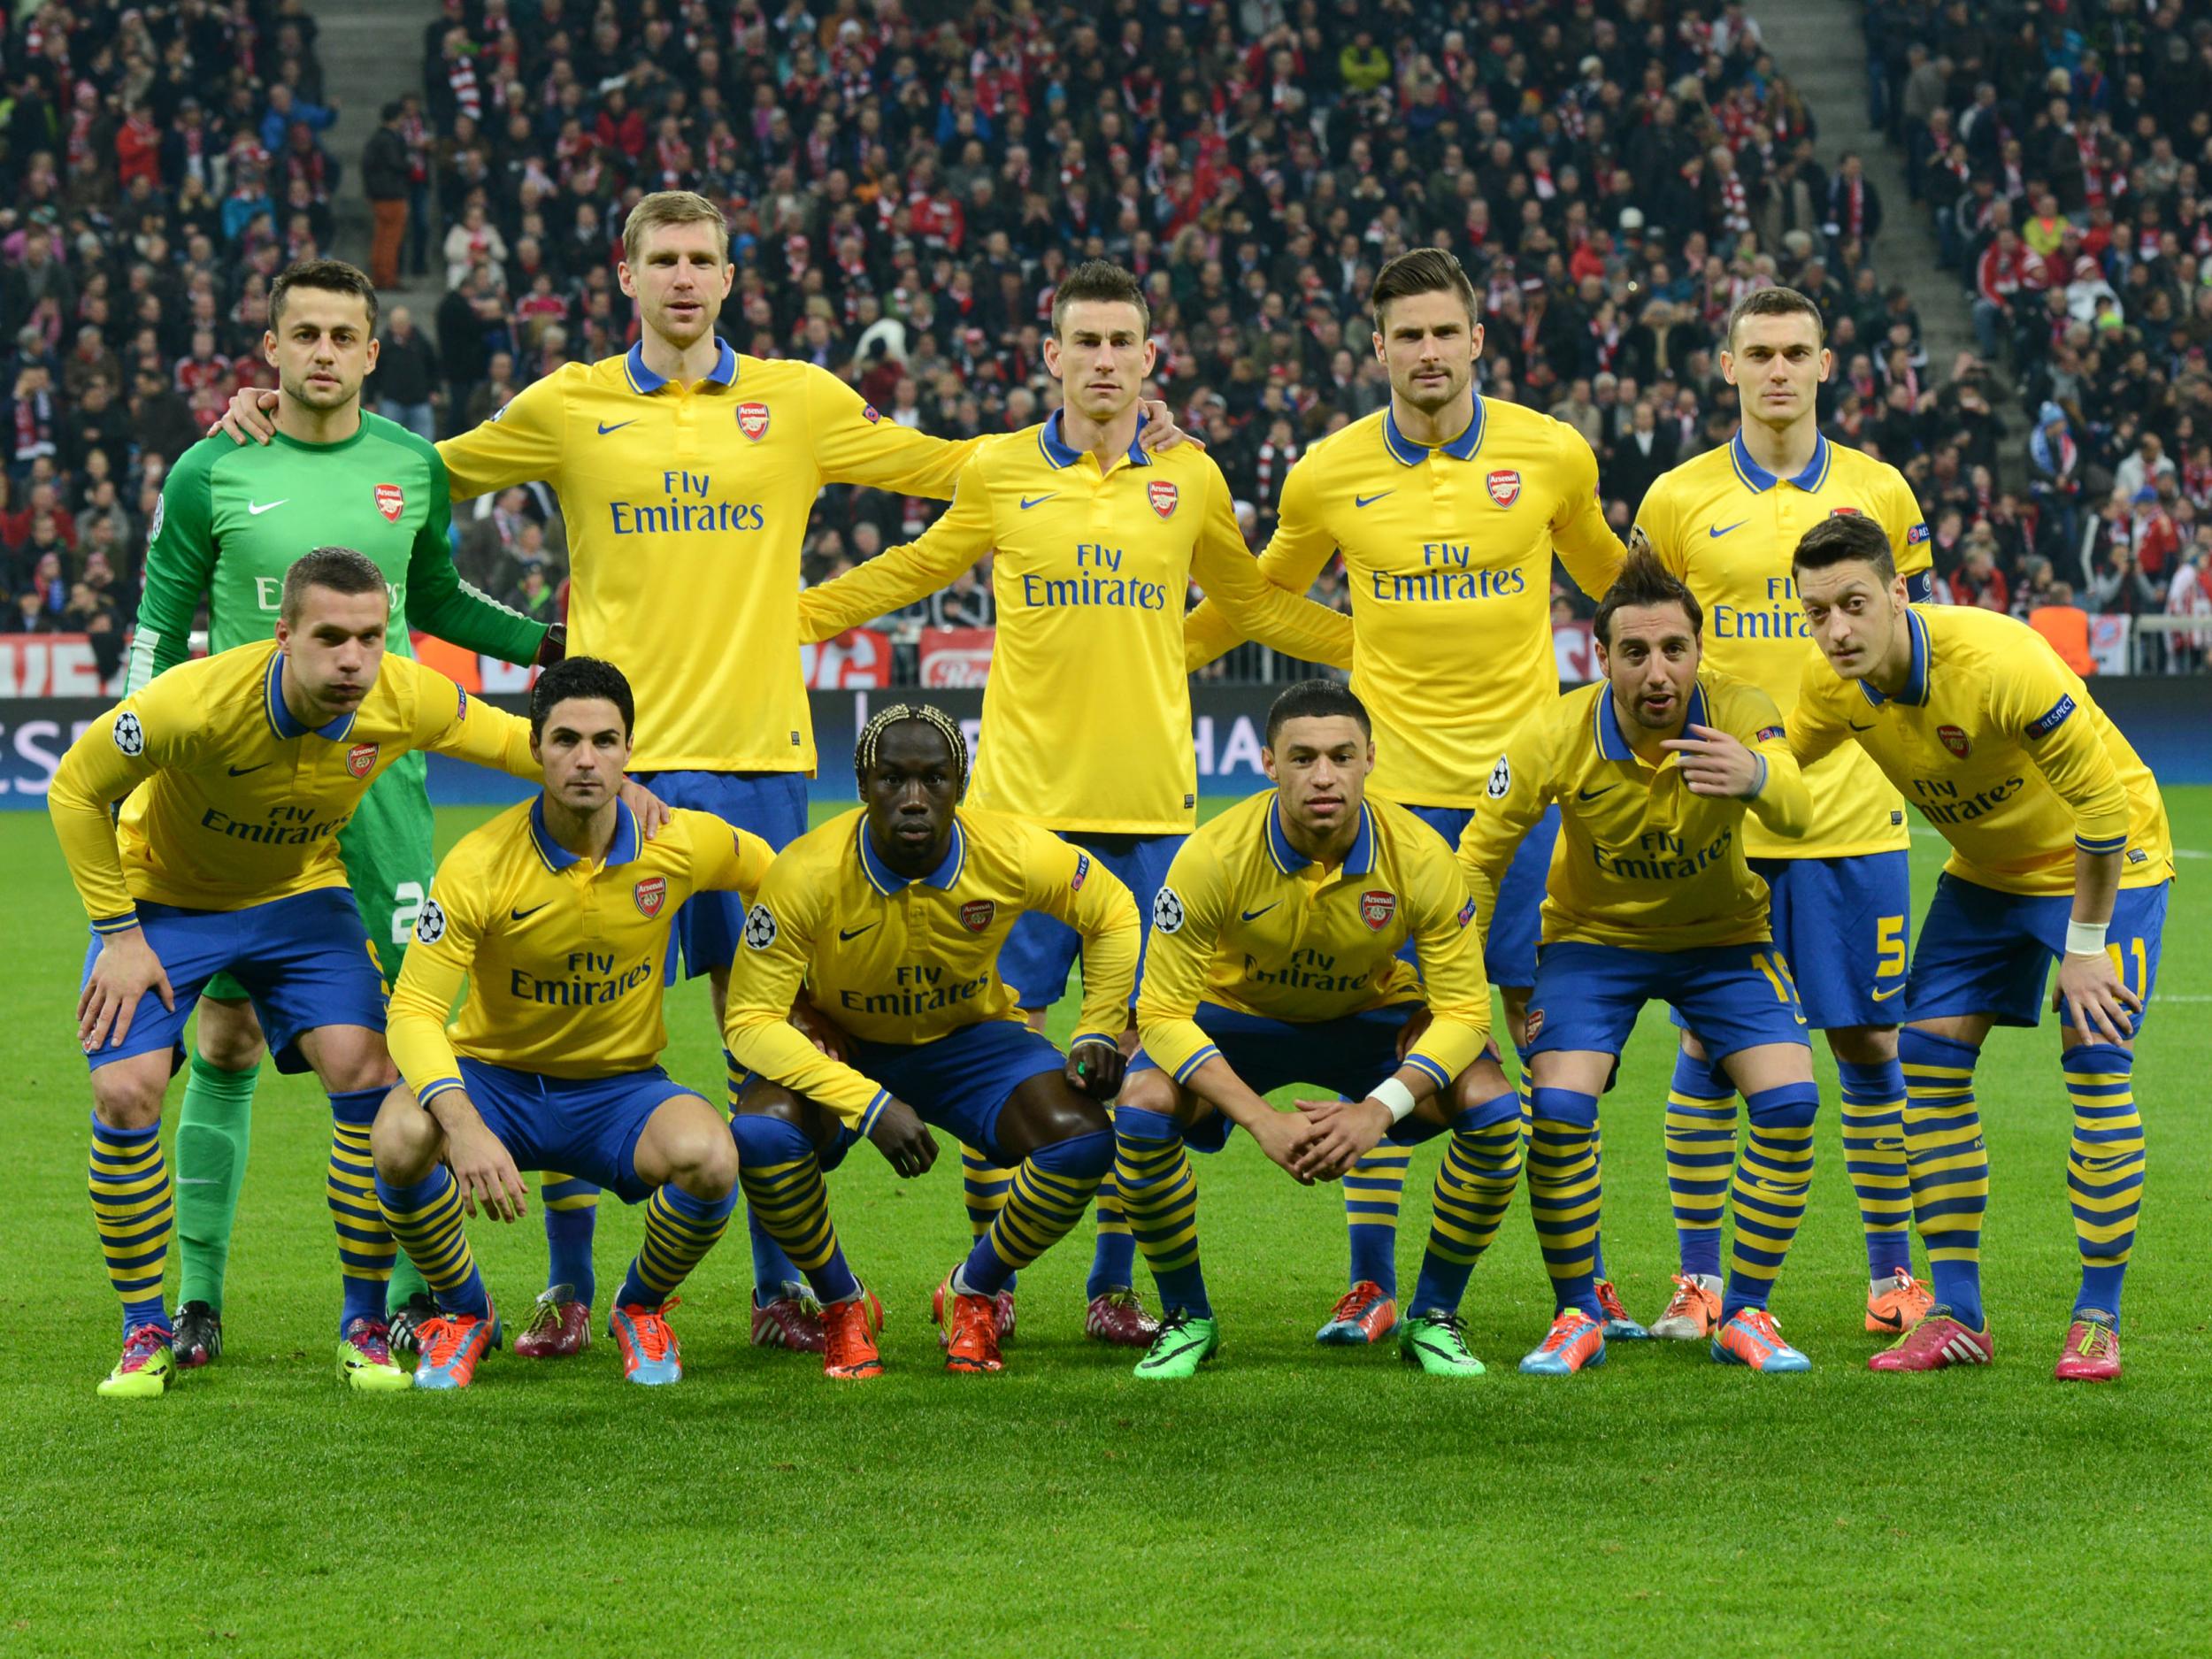 The Arsenal side that crashed out to Bayern in 2014